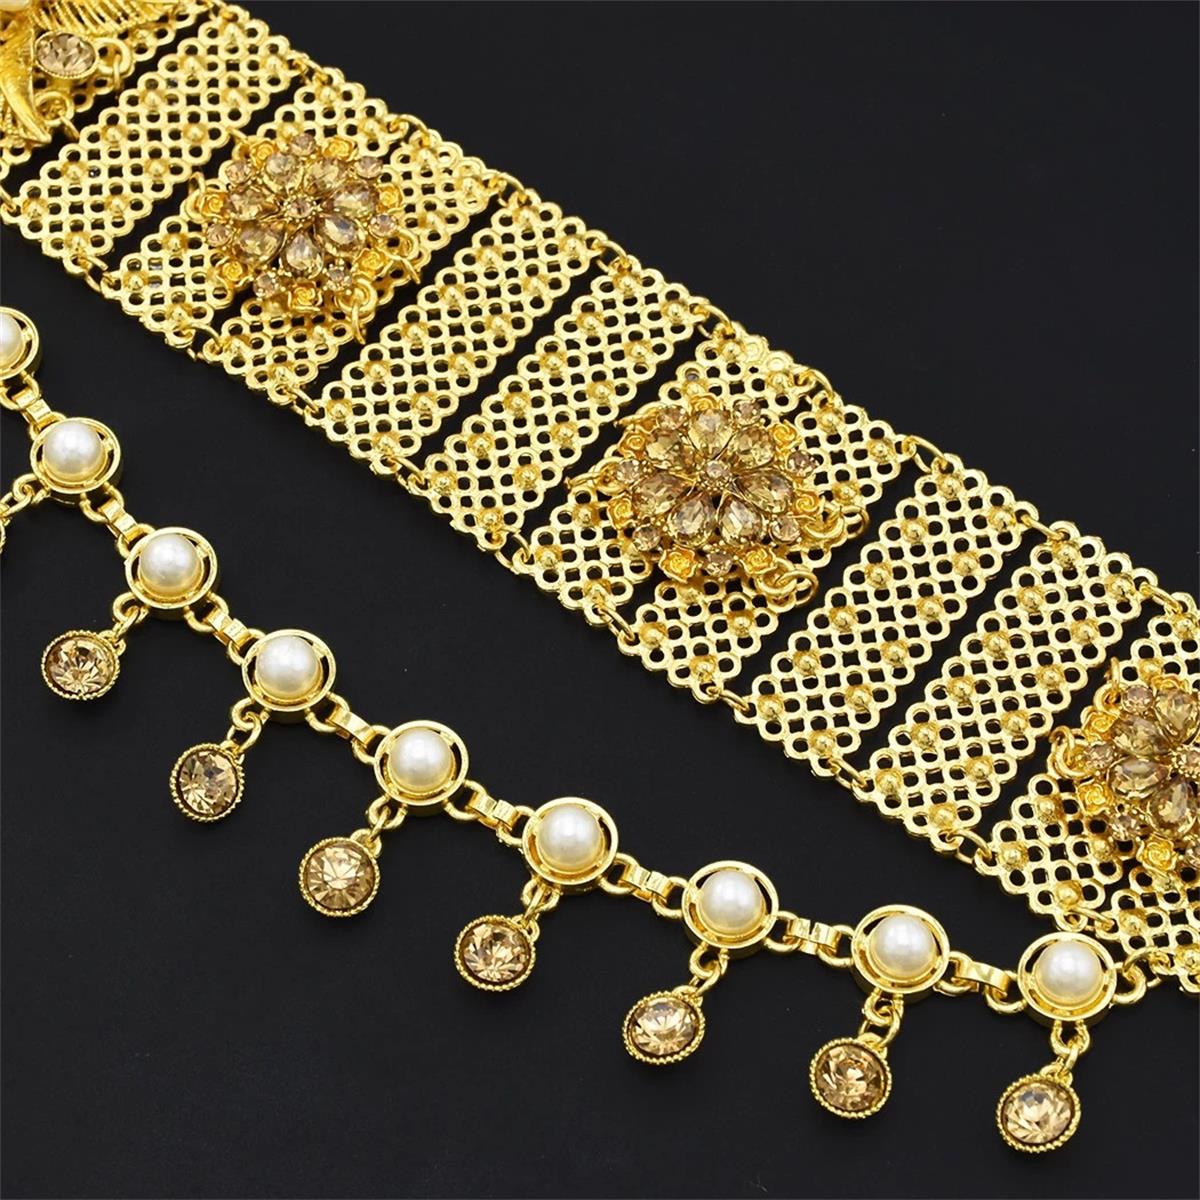 2 Pieces Of Gold Vintage Jewelry